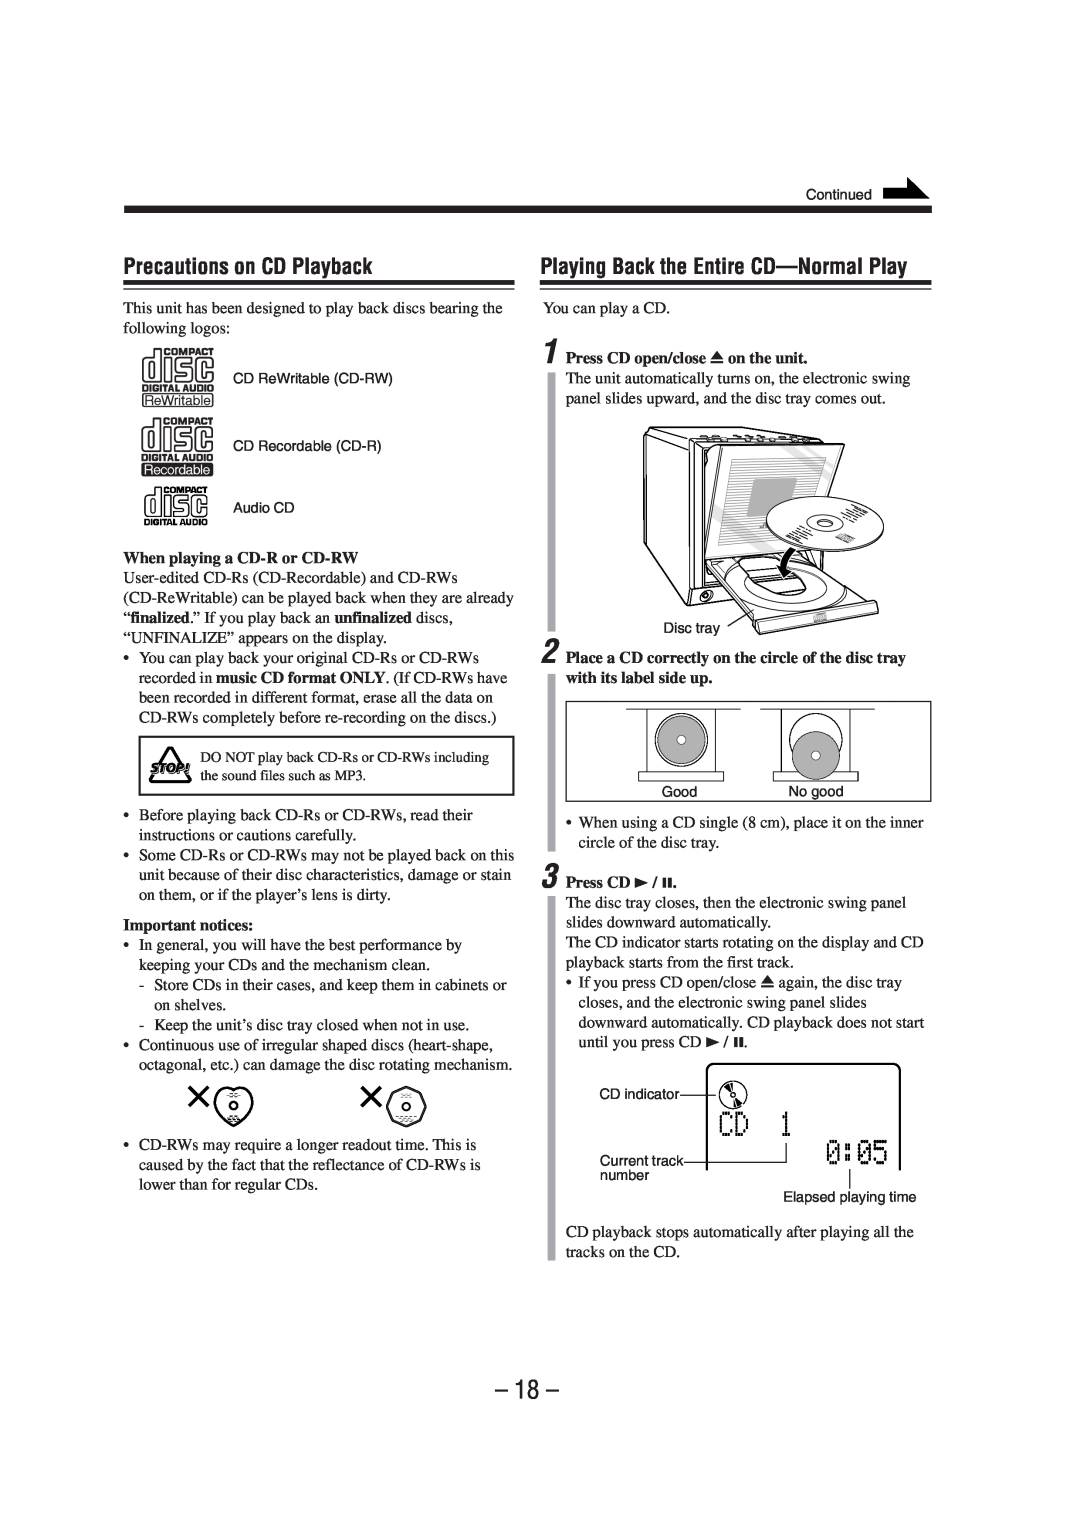 JVC FS-A52 manual Precautions on CD Playback, Playing Back the Entire CD-NormalPlay 